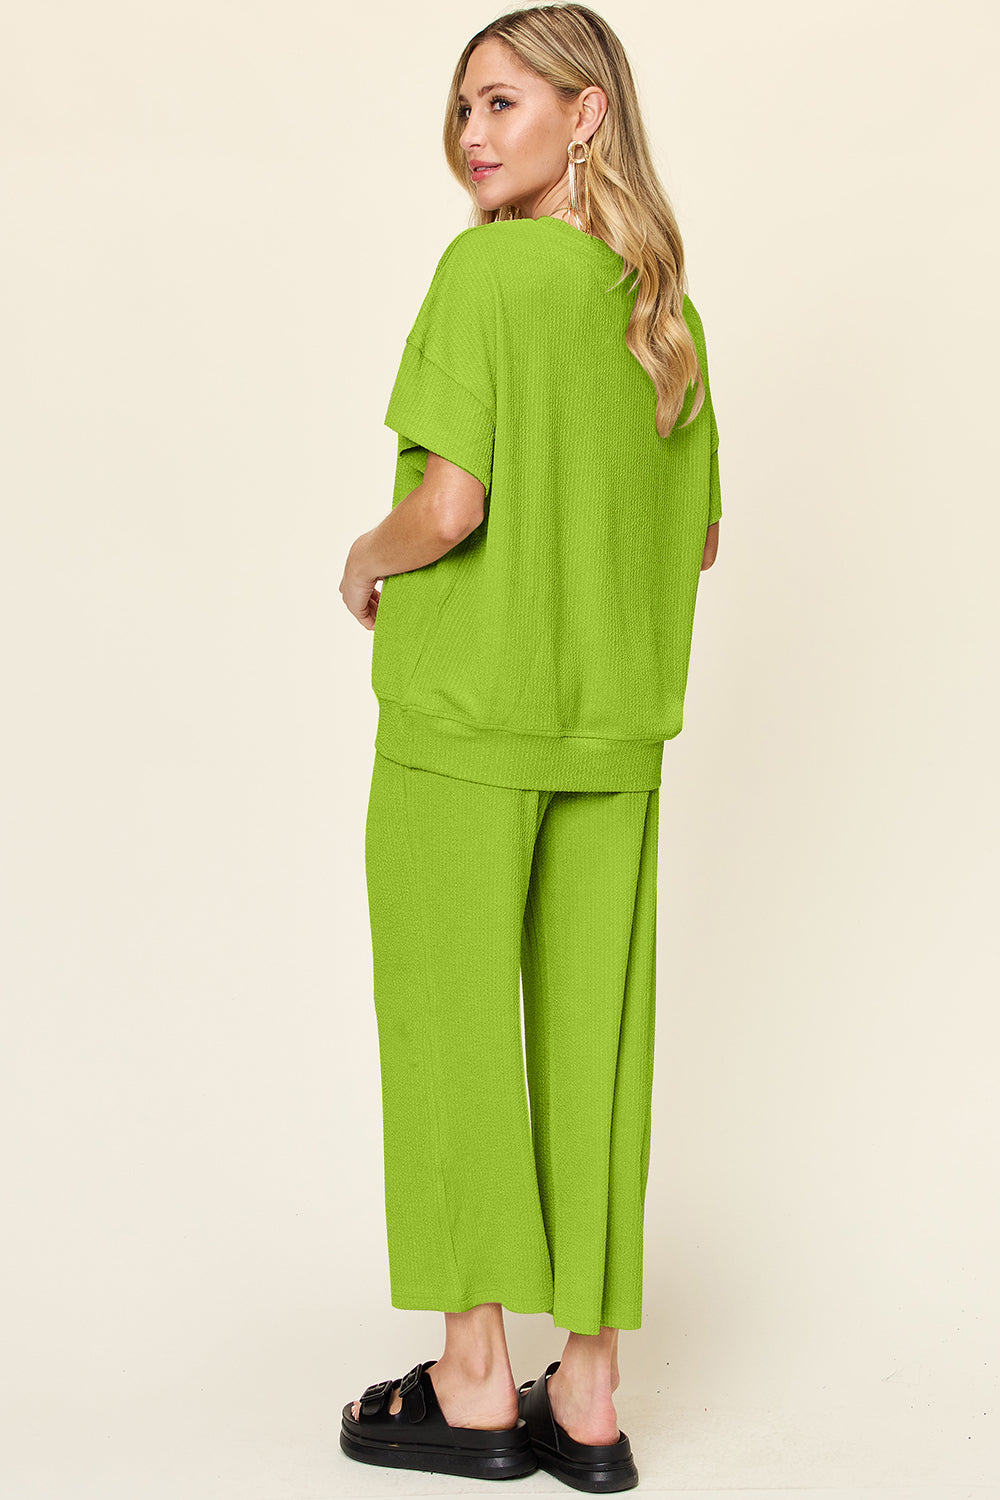 Texture Round Neck Short Sleeve T-Shirt and Wide Leg Pants - 6 colors